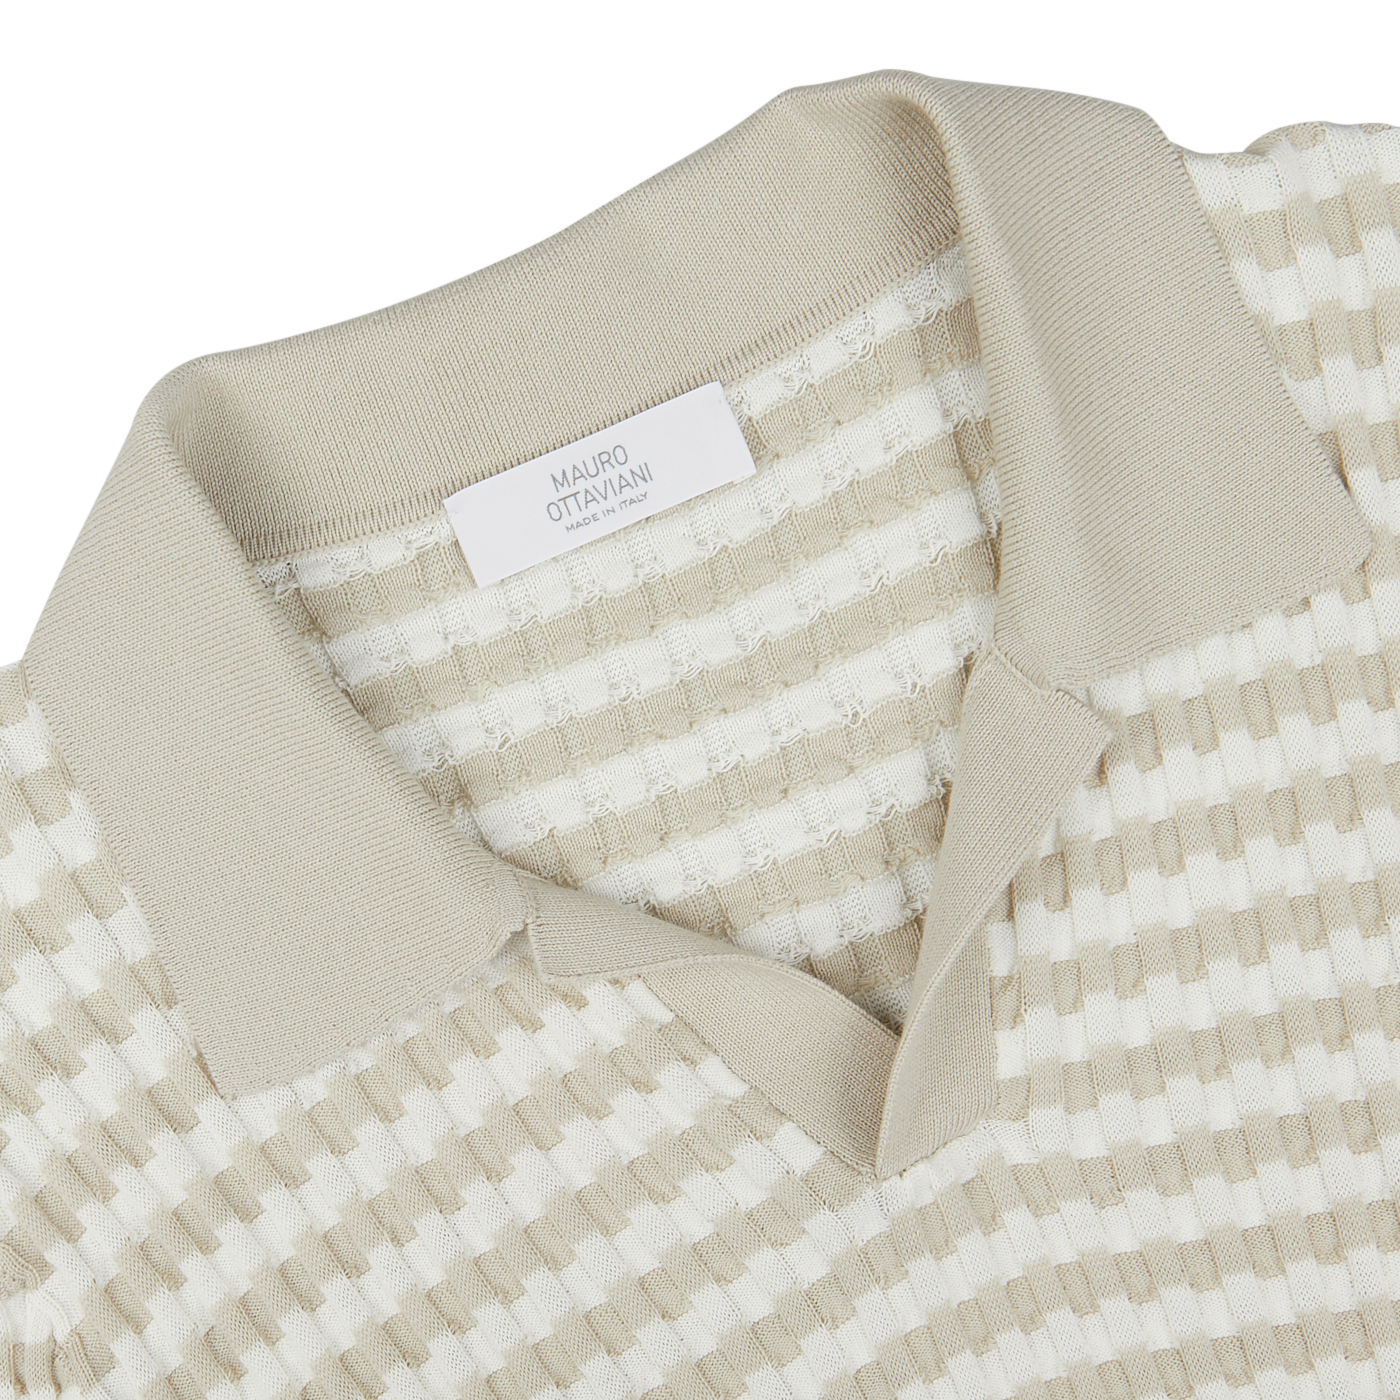 Cream Beige Cotton Rib-Knitted Polo Shirt with a Mauro Ottaviani label on the collar.